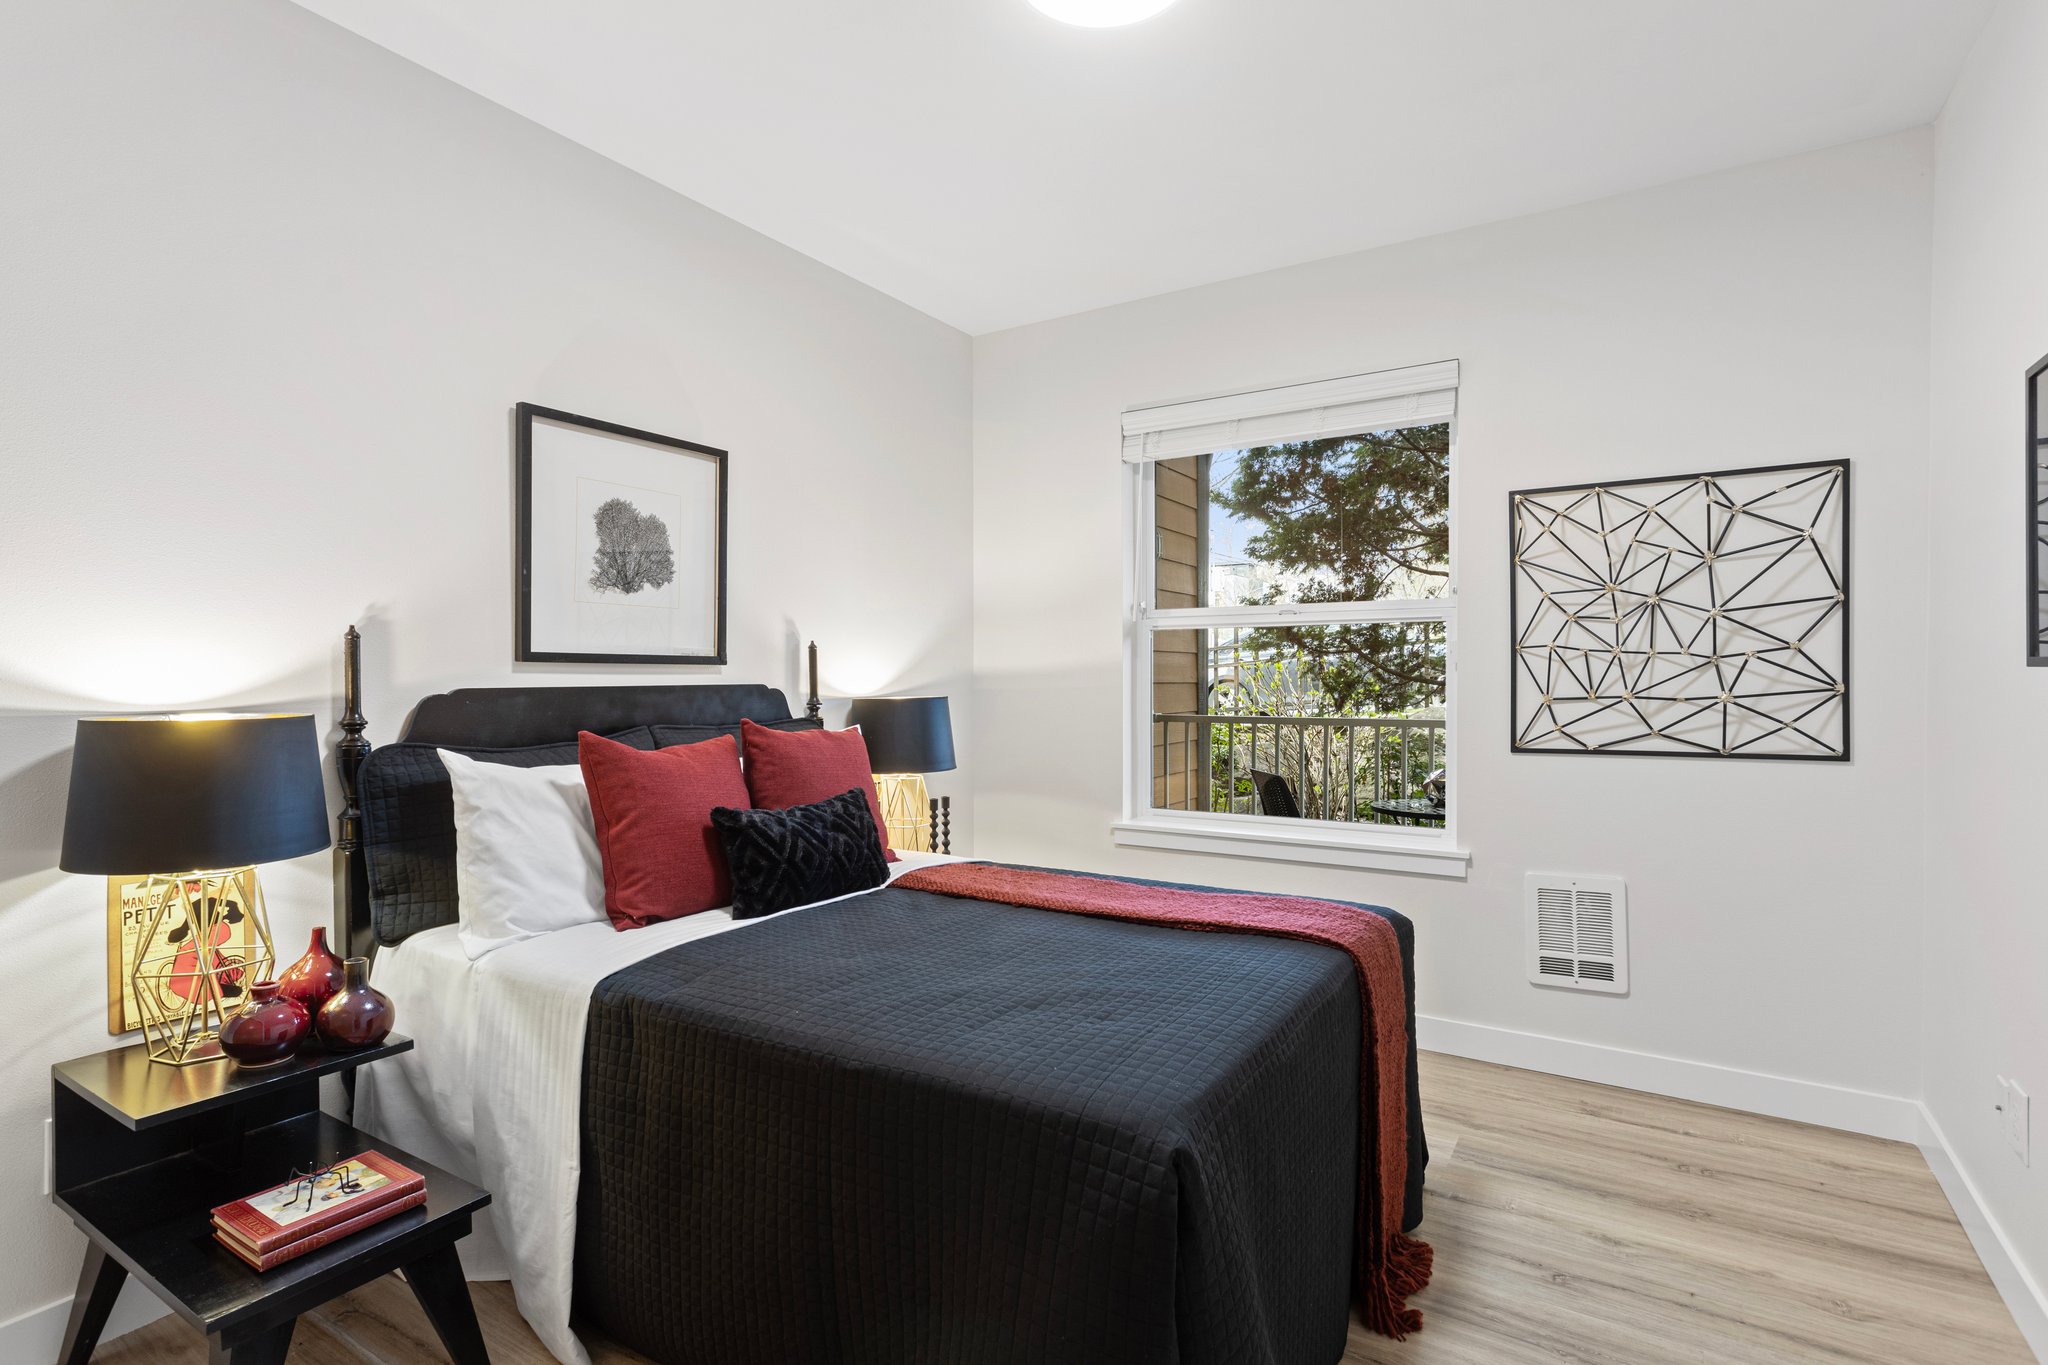 Find your focus in the spacious north-facing second bedroom, an ideal spot for a home office or tranquil hideaway.